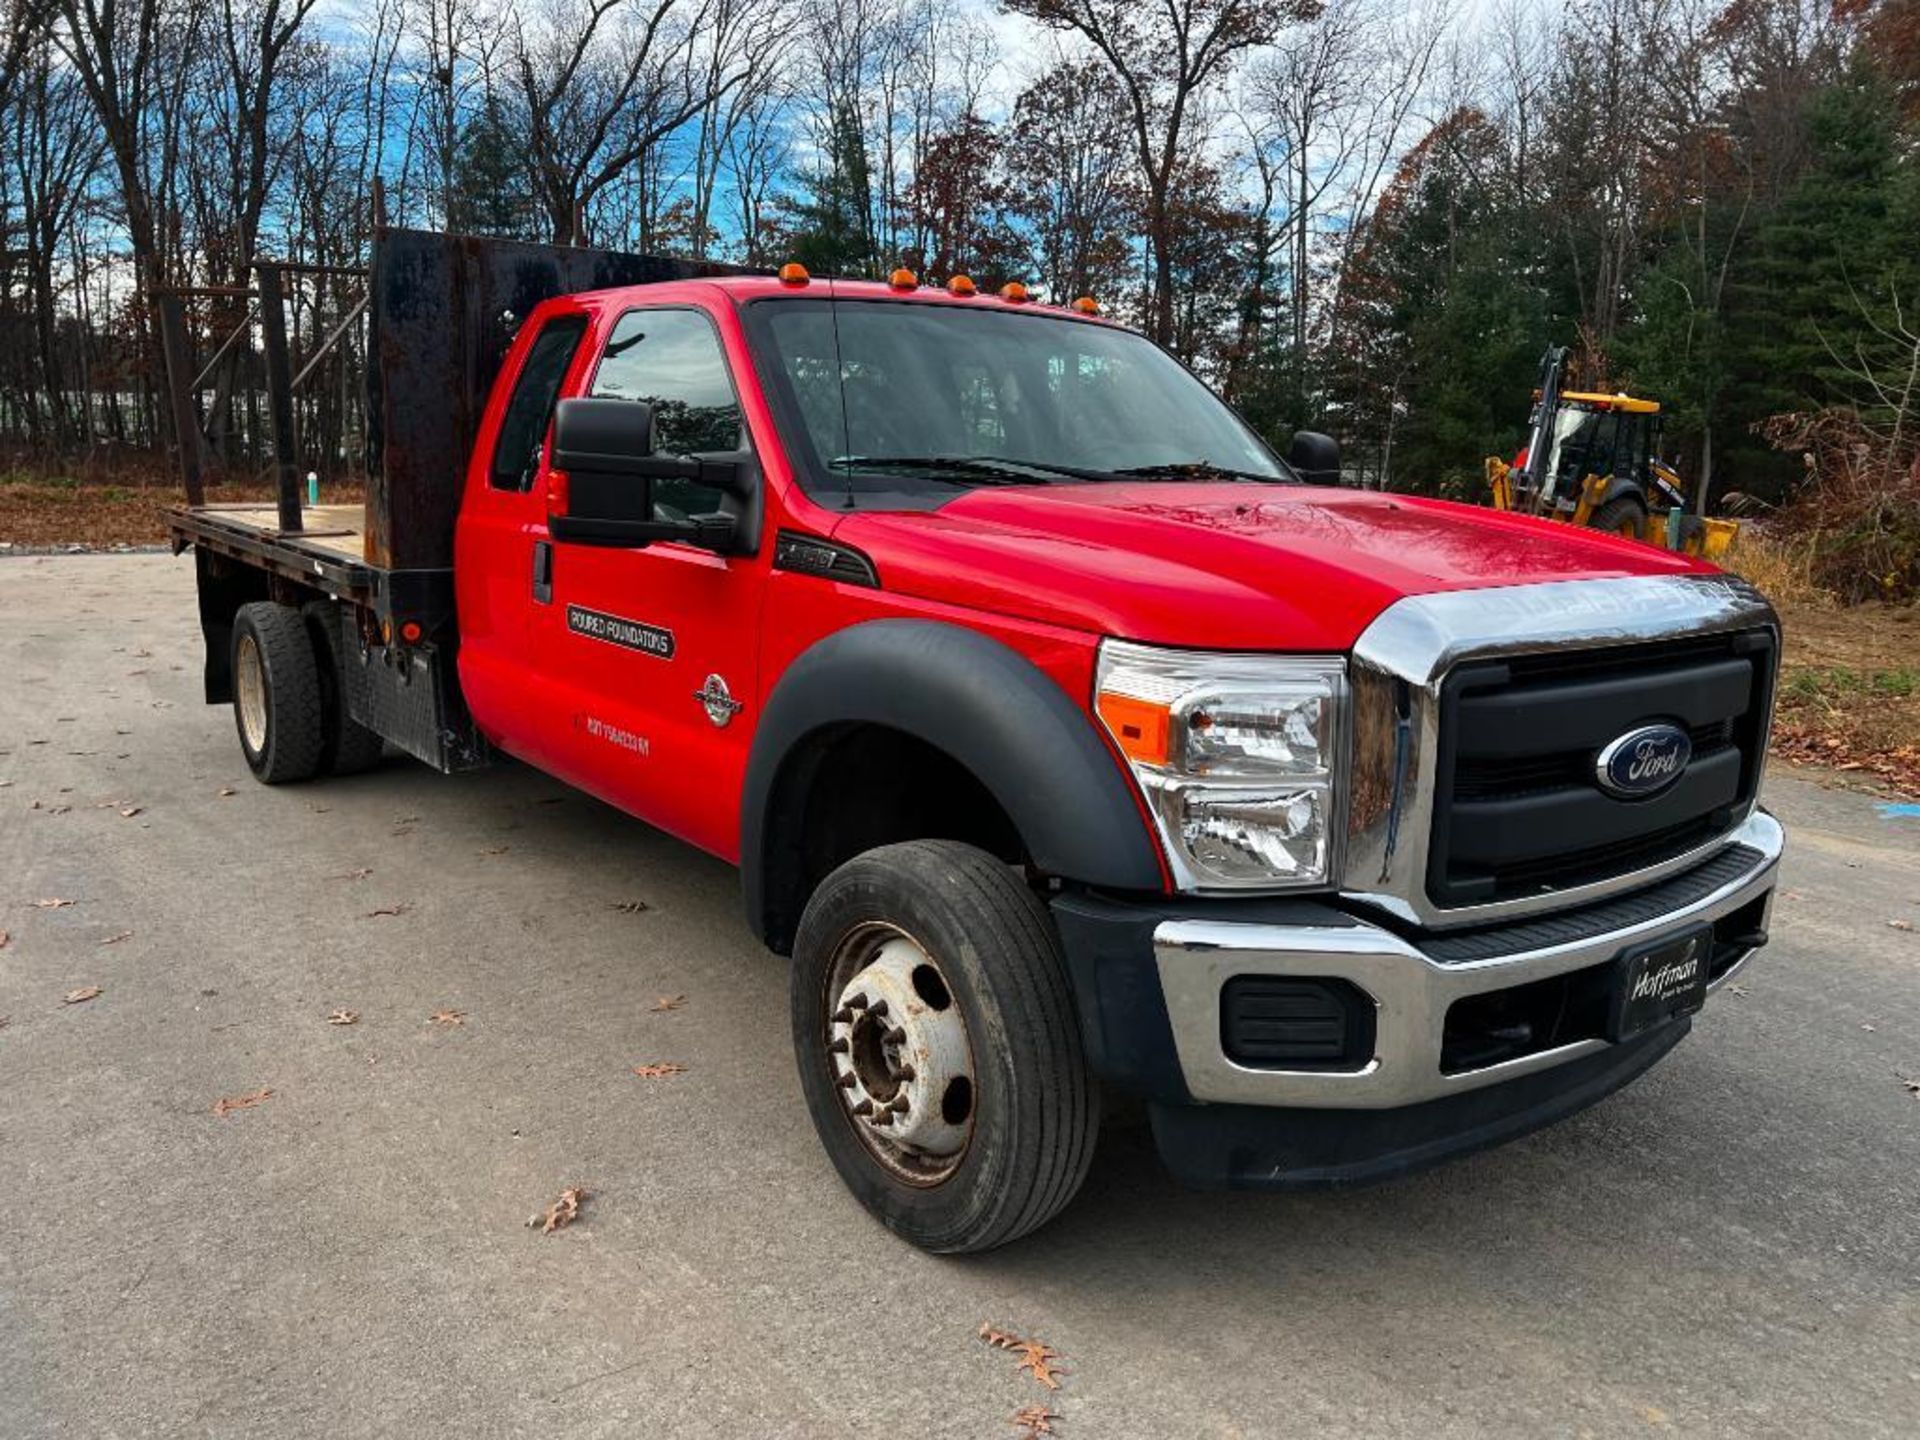 2016 Ford F550 Super Duty Power Stroke 6.7L truck, 4x4, dually, 98,306 miles, 8' x 12' flatbed, VIN: